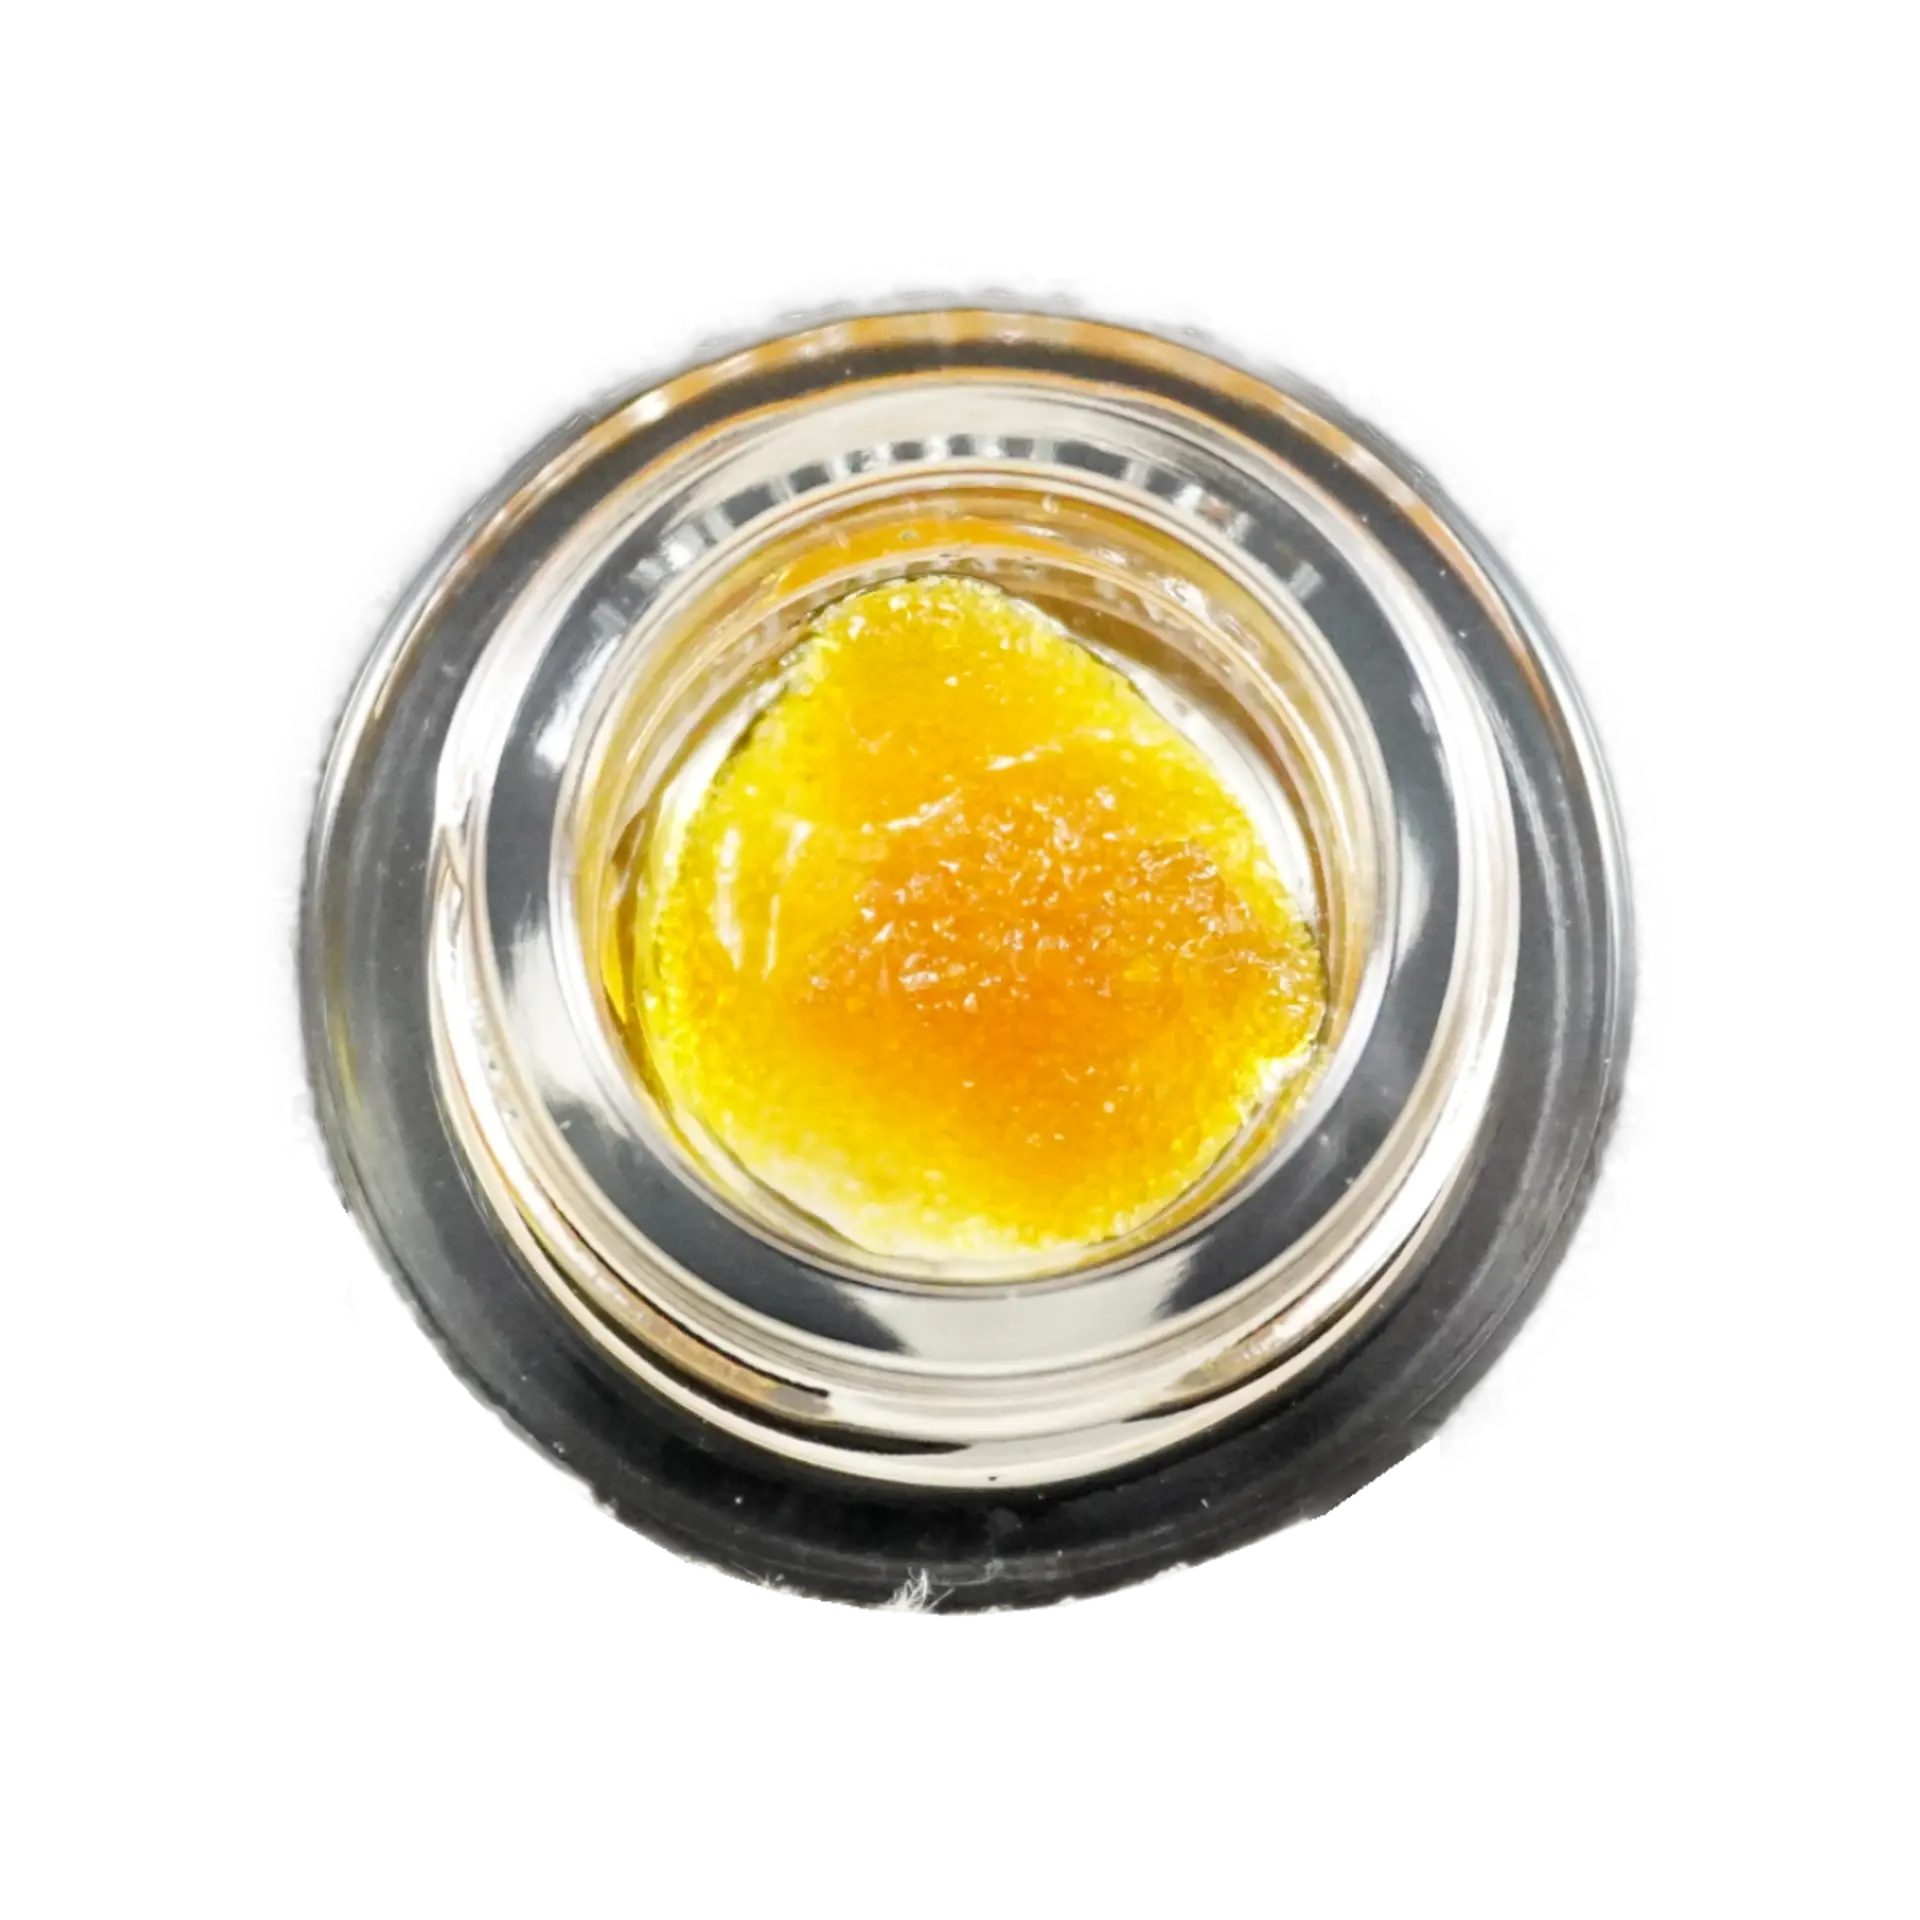 Uncle Bruce Live Resin 1g, 1 of 1